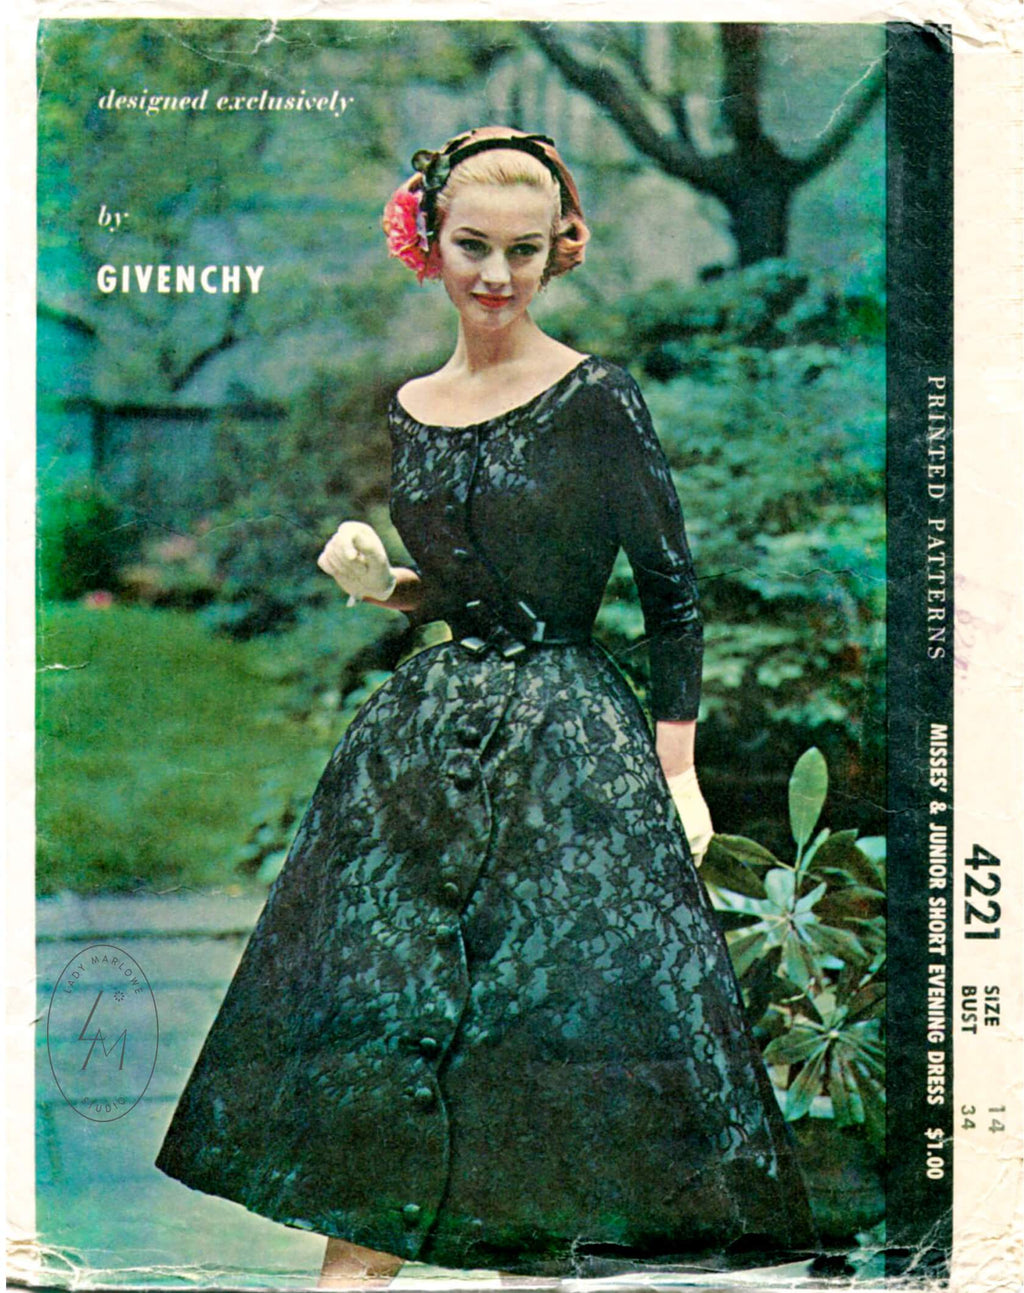 McCall 4221 Givenchy dress 1950s vintage sewing pattern 1950 50s evening gown